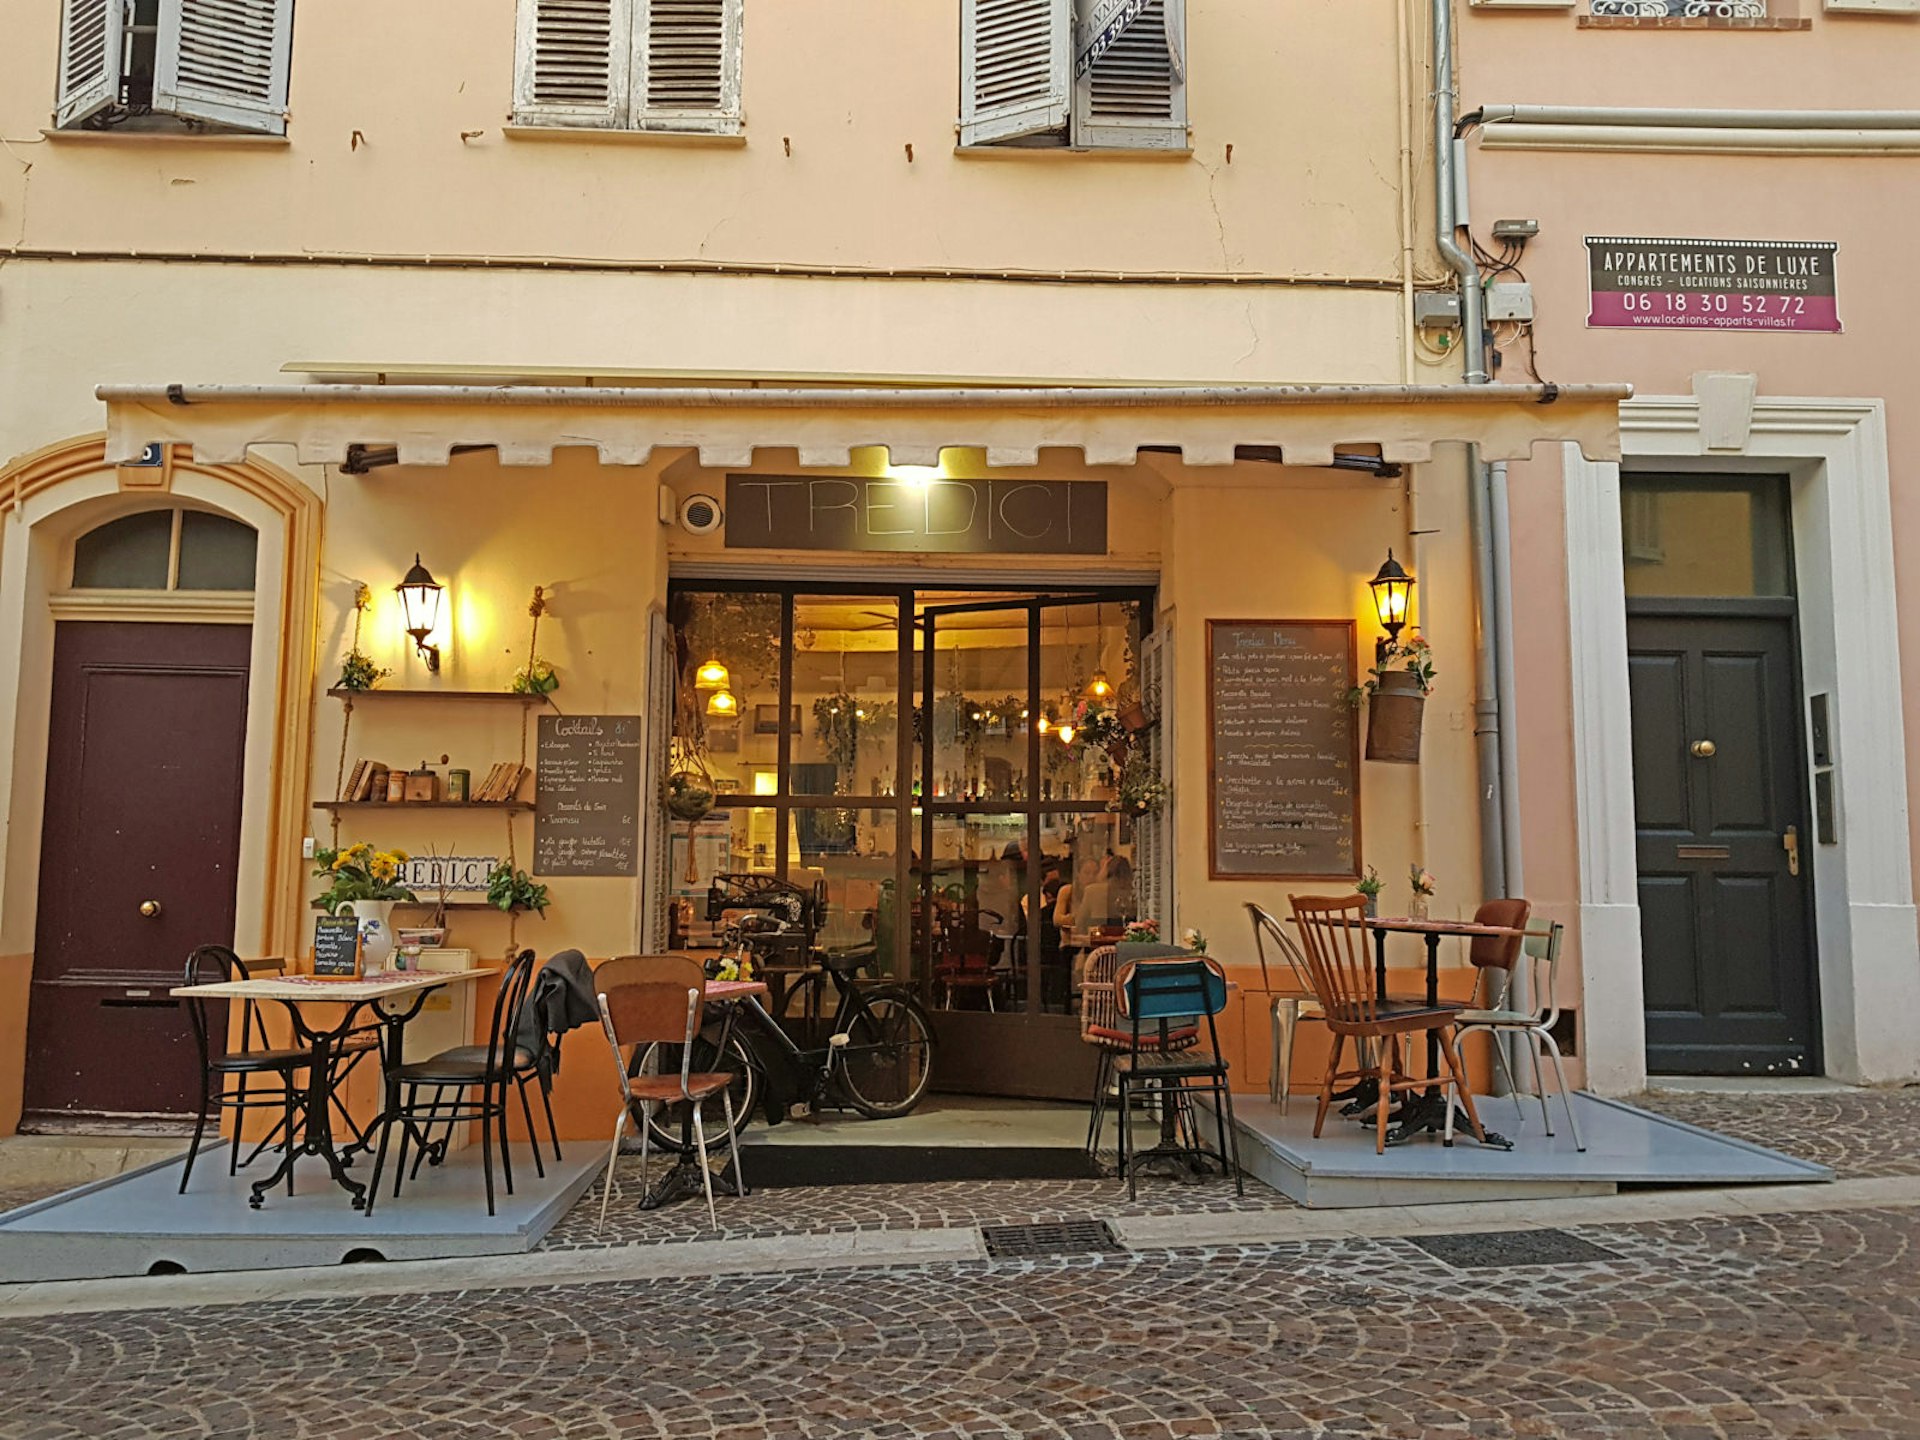 The cream shopfront of the Tredici Restaurant in Cannes with chairs outside